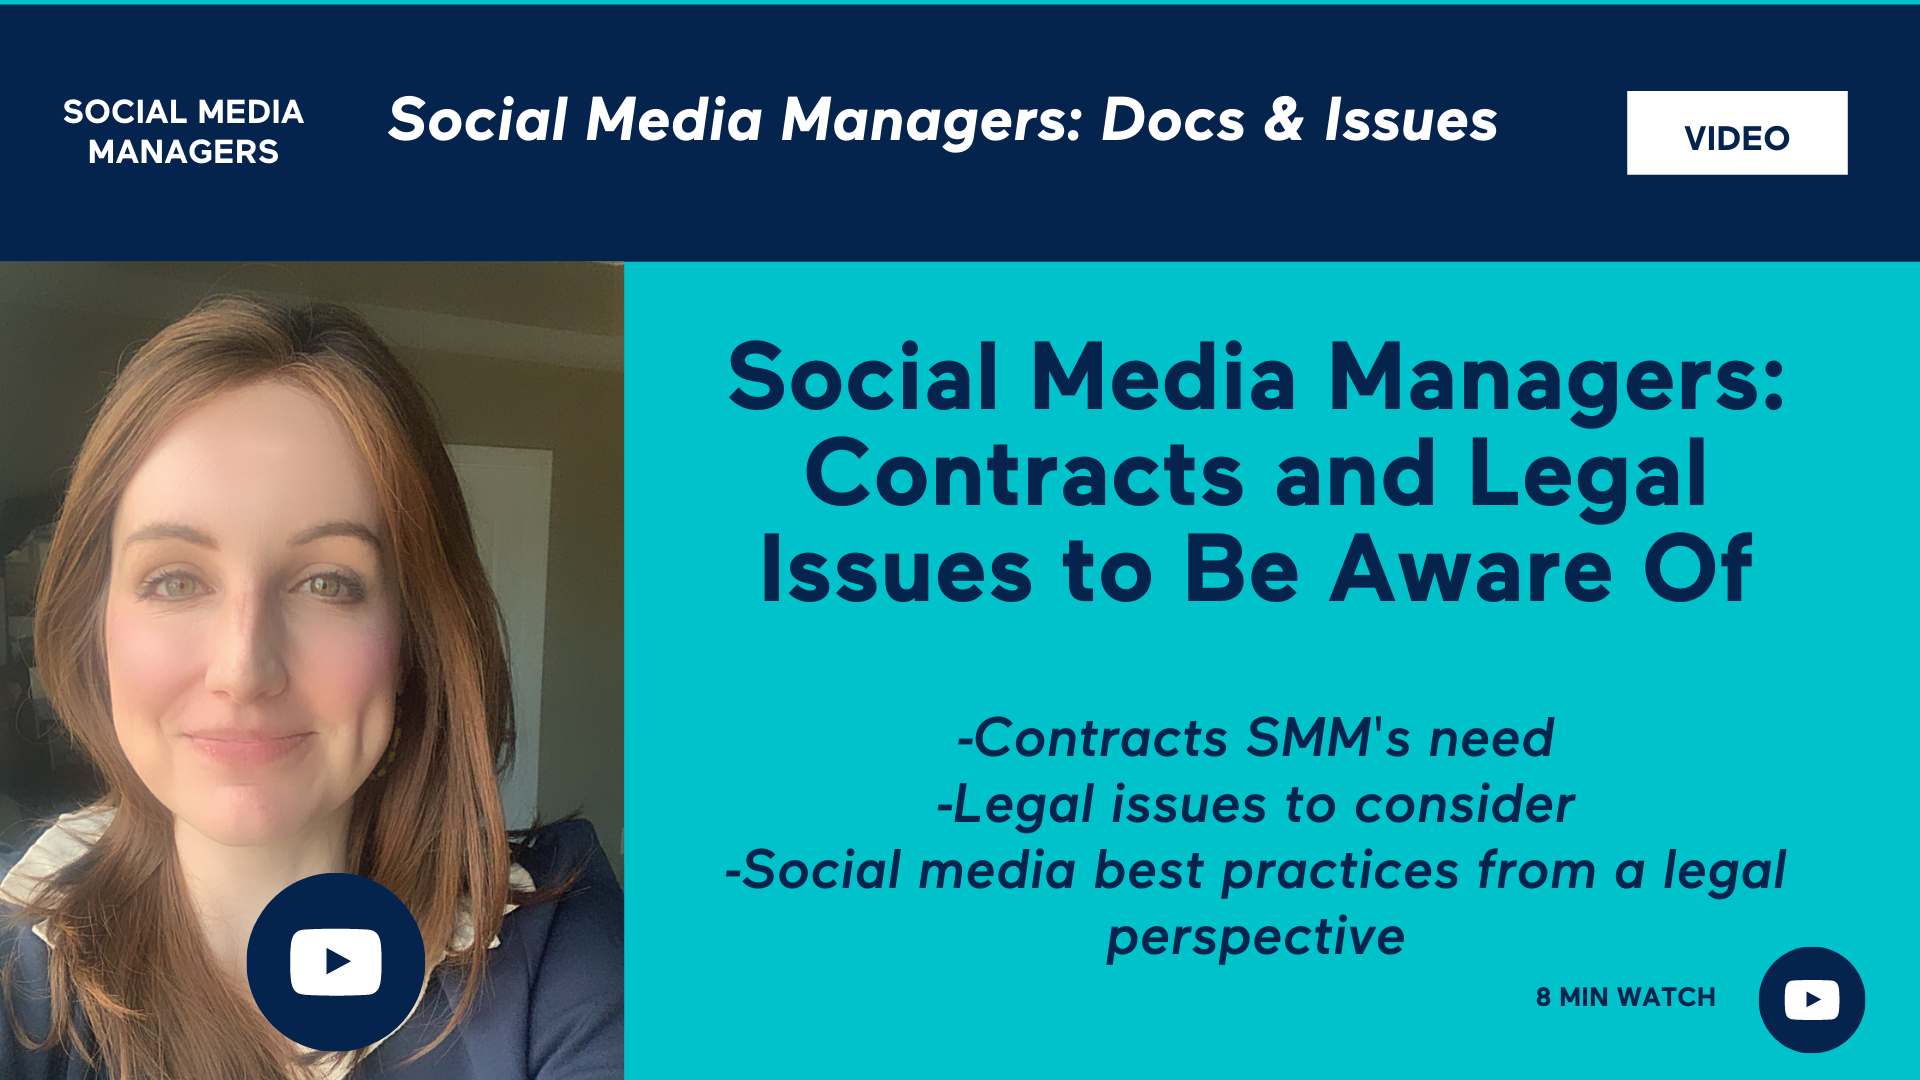 Social Media Managers Docs & Issues